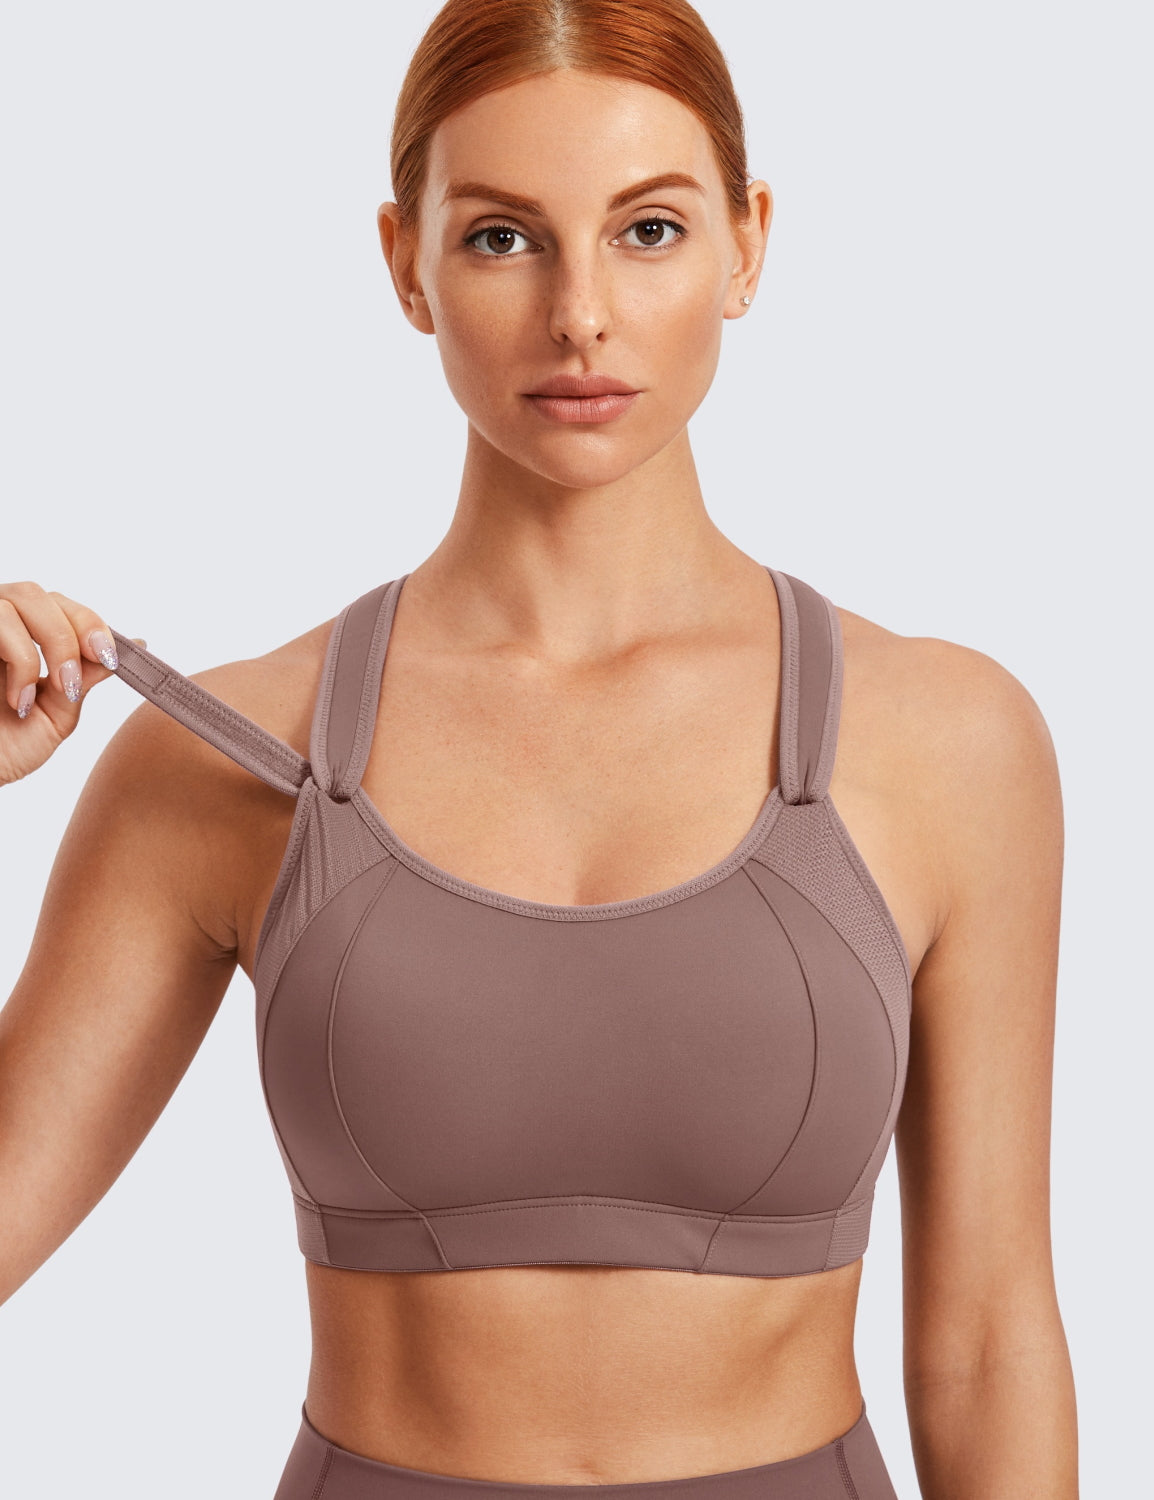  SYROKAN Sports Bras For Women High Impact Mesh Full Coverage  Racerback Support High Neck Wireless No Bounce Running Bra Leather